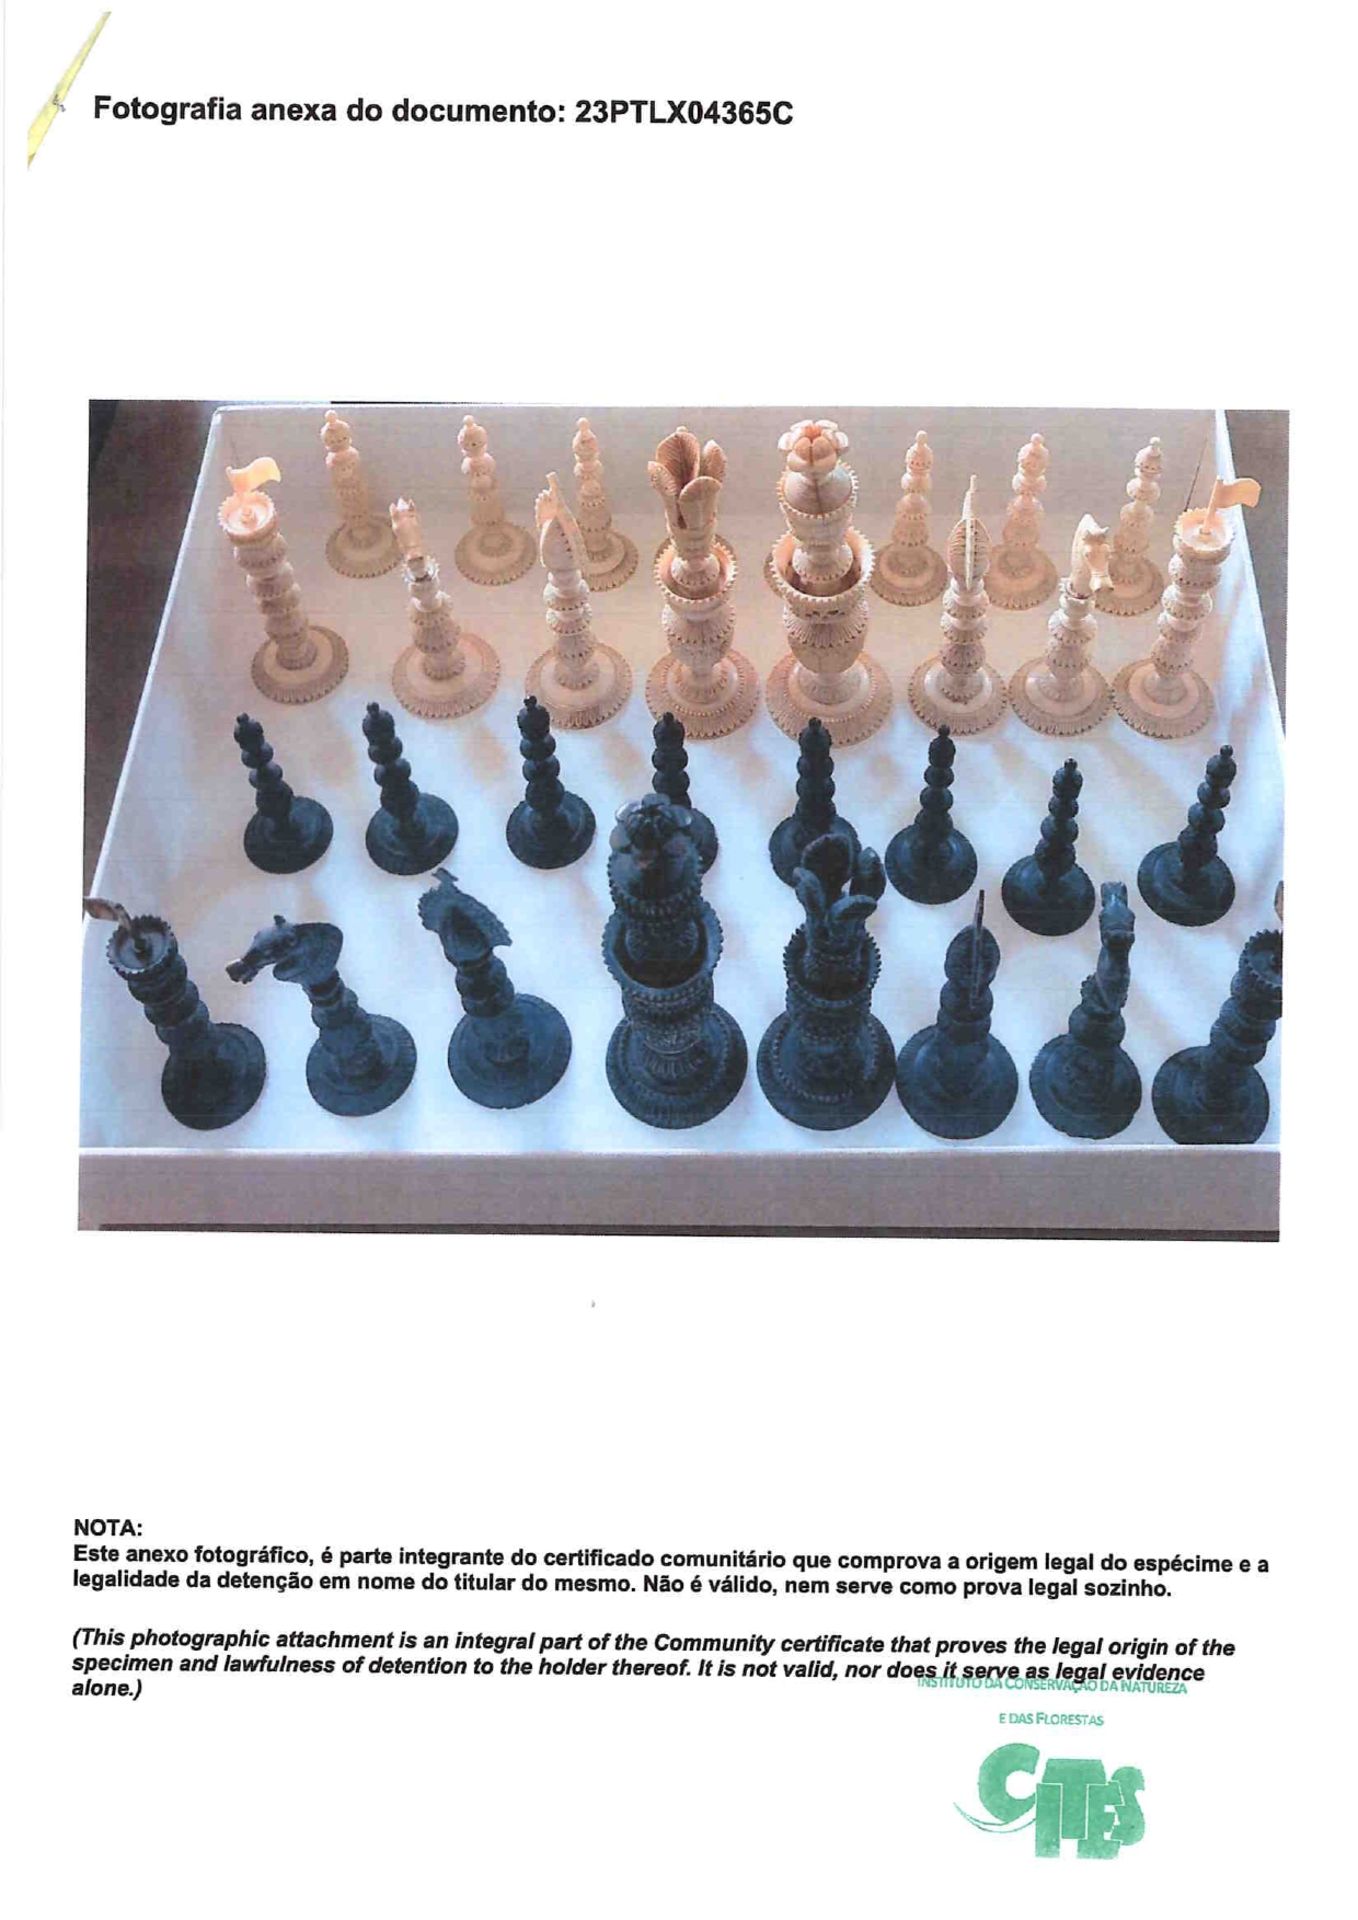 Chess pieces - "Kashmir" style - Image 5 of 5